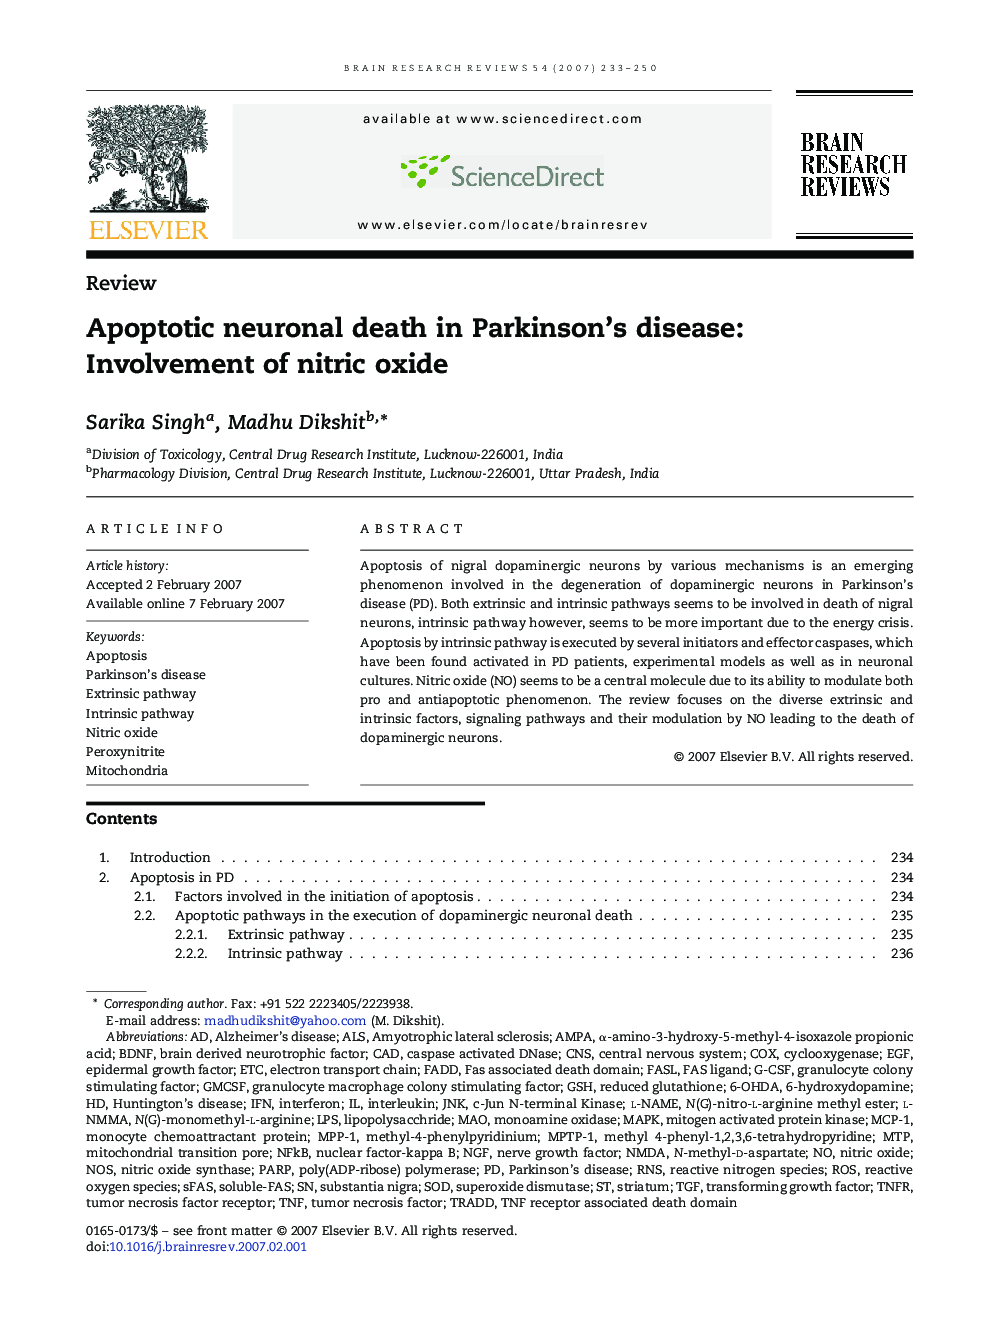 Apoptotic neuronal death in Parkinson's disease: Involvement of nitric oxide